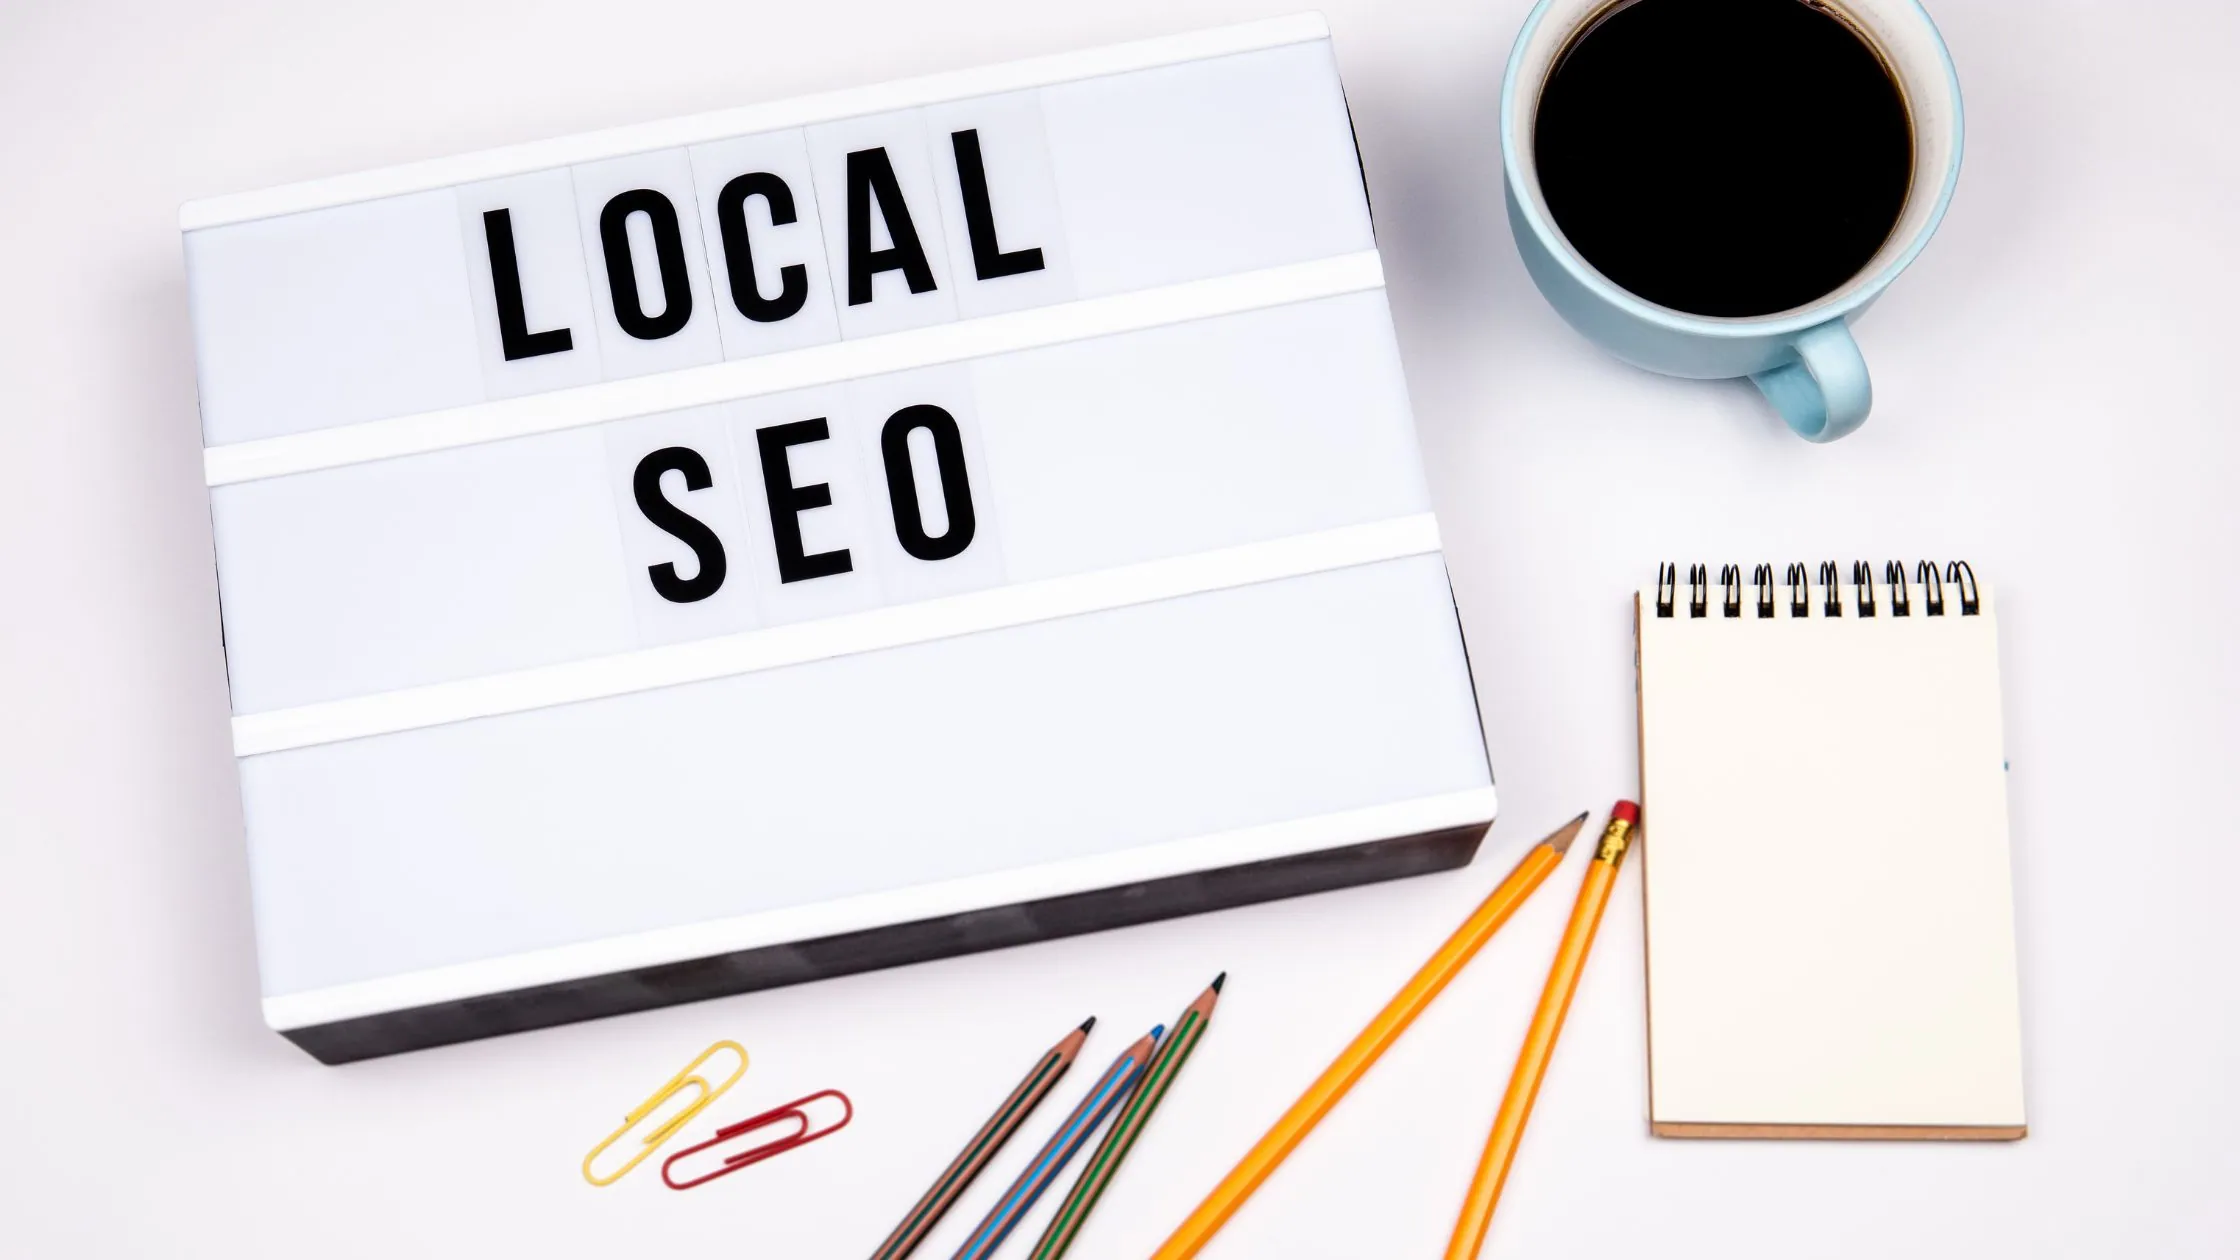 Local SEO Services What It Is and Why It's Important for Small Businesses